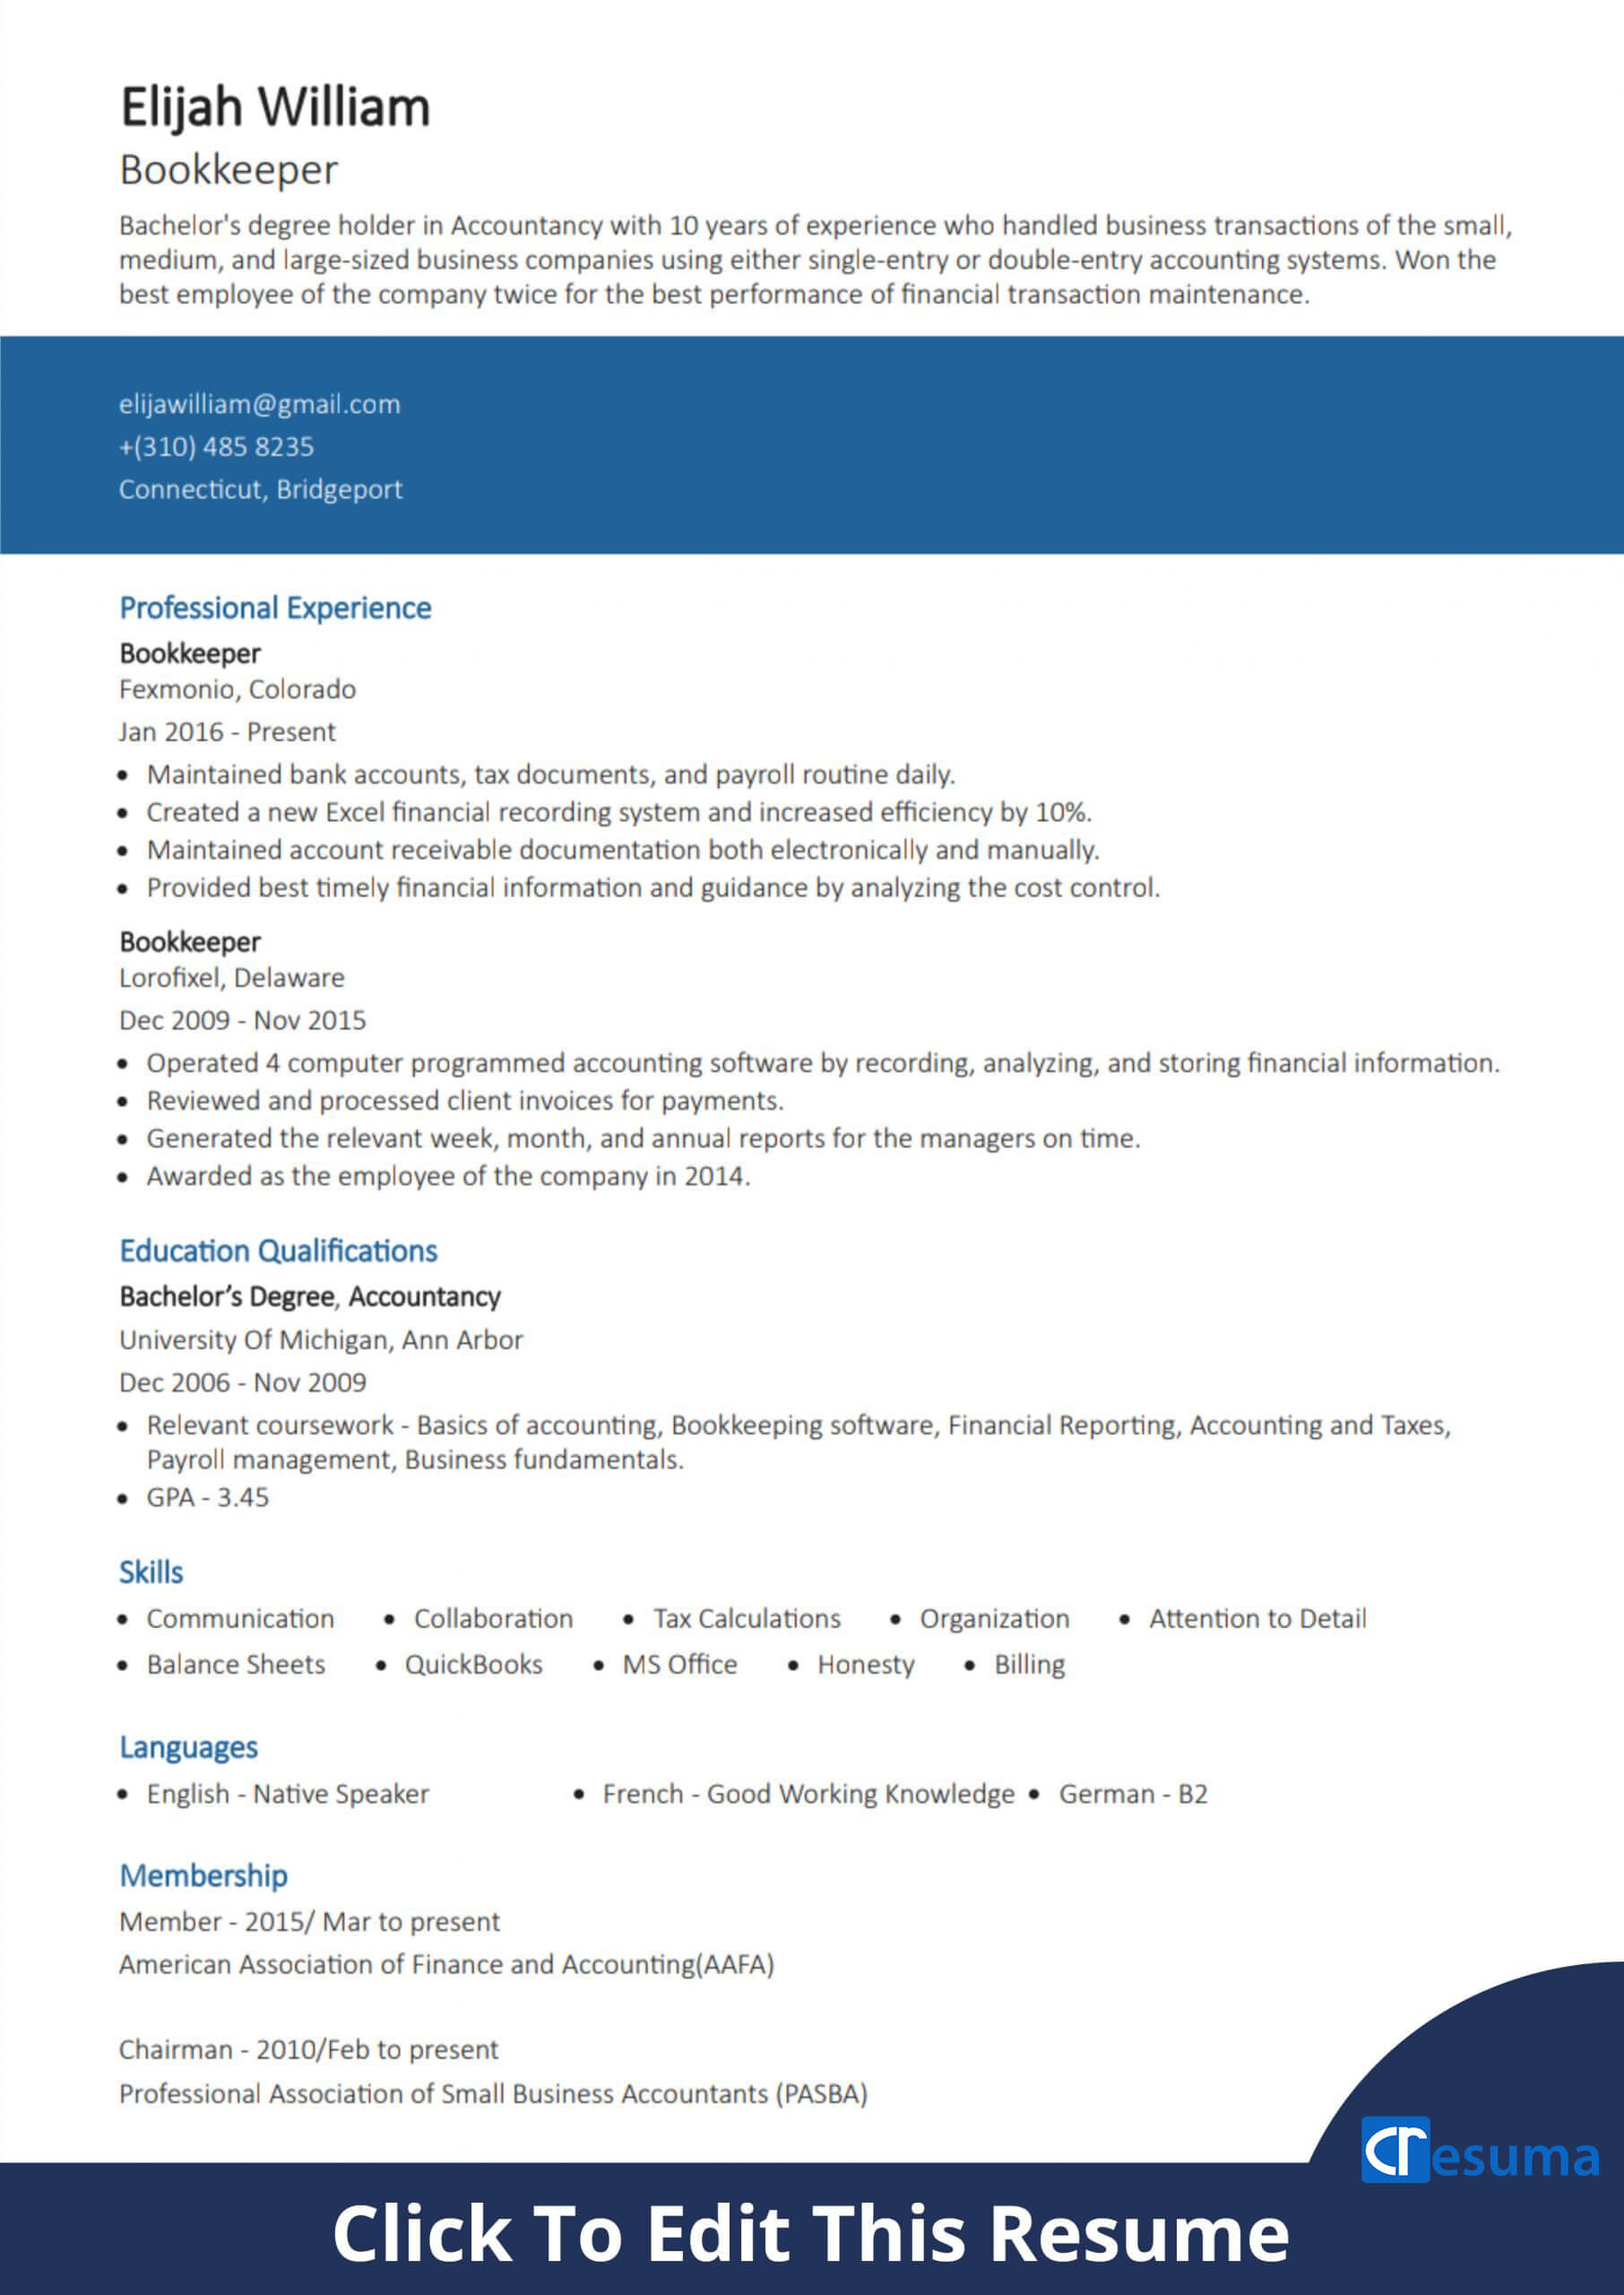 bookkeeper resume example featured image